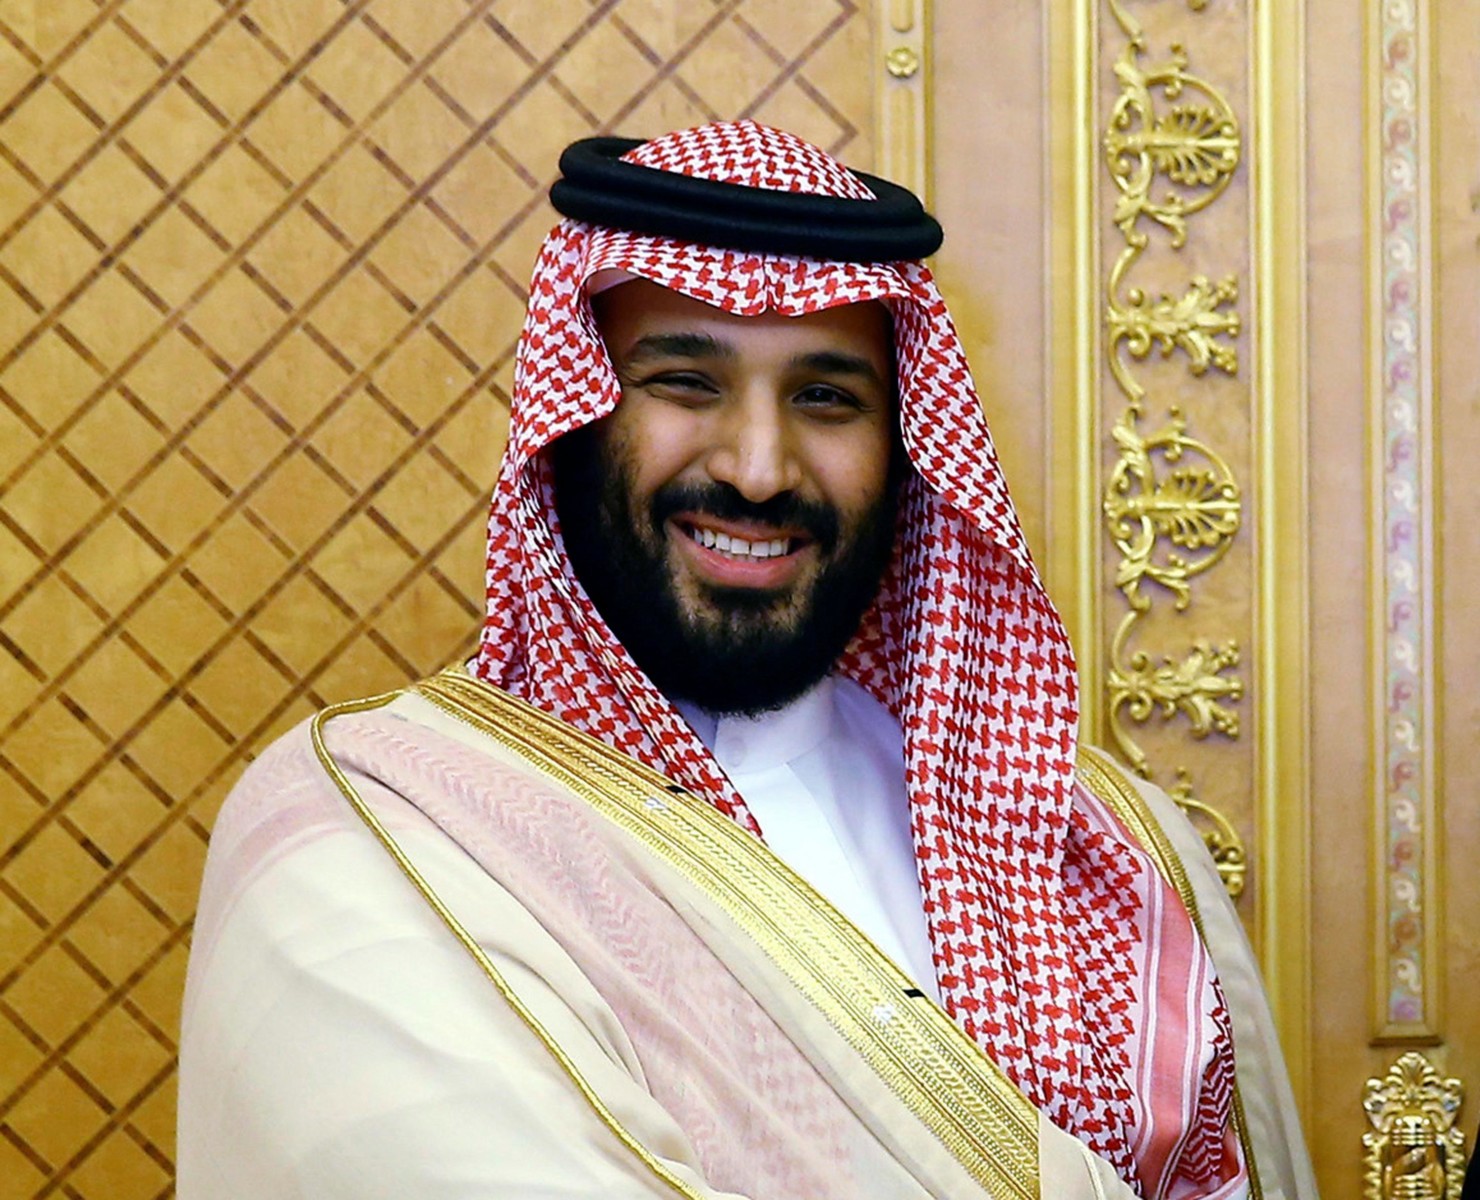 , Newcastle takeover: Mohammad bin Salman owns world’s most expensive home, has a Da Vinci painting and is pals with Trump